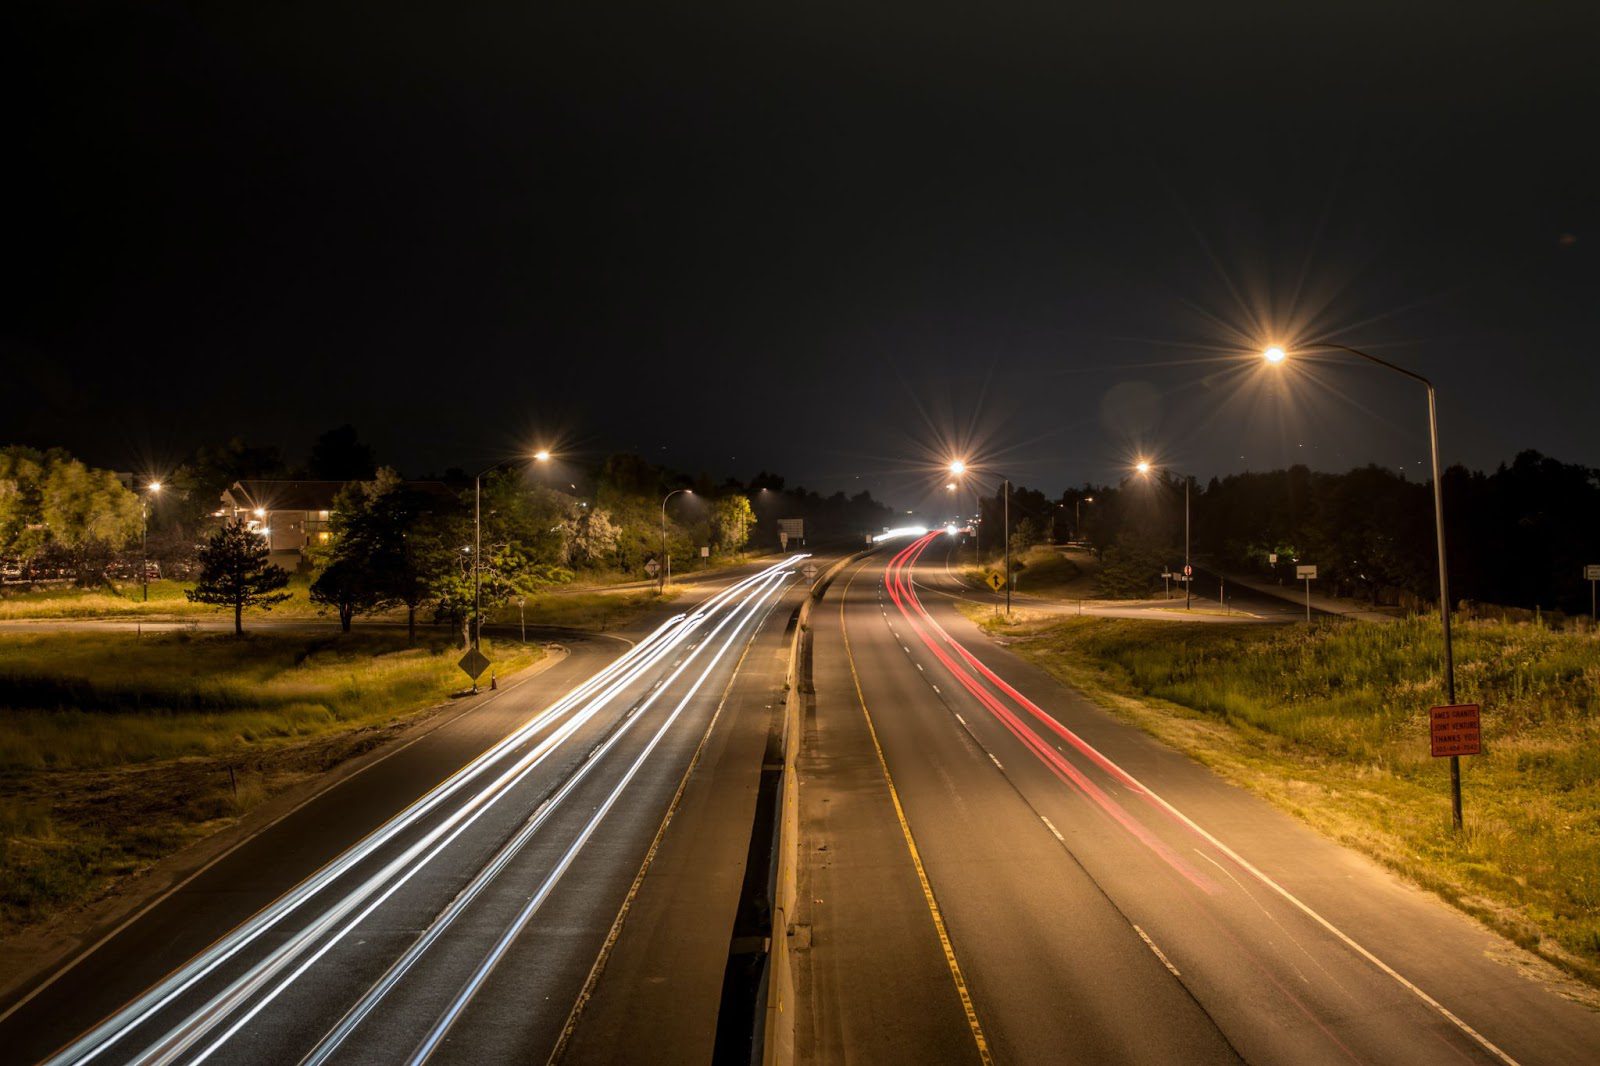 A shot of a busy road at night